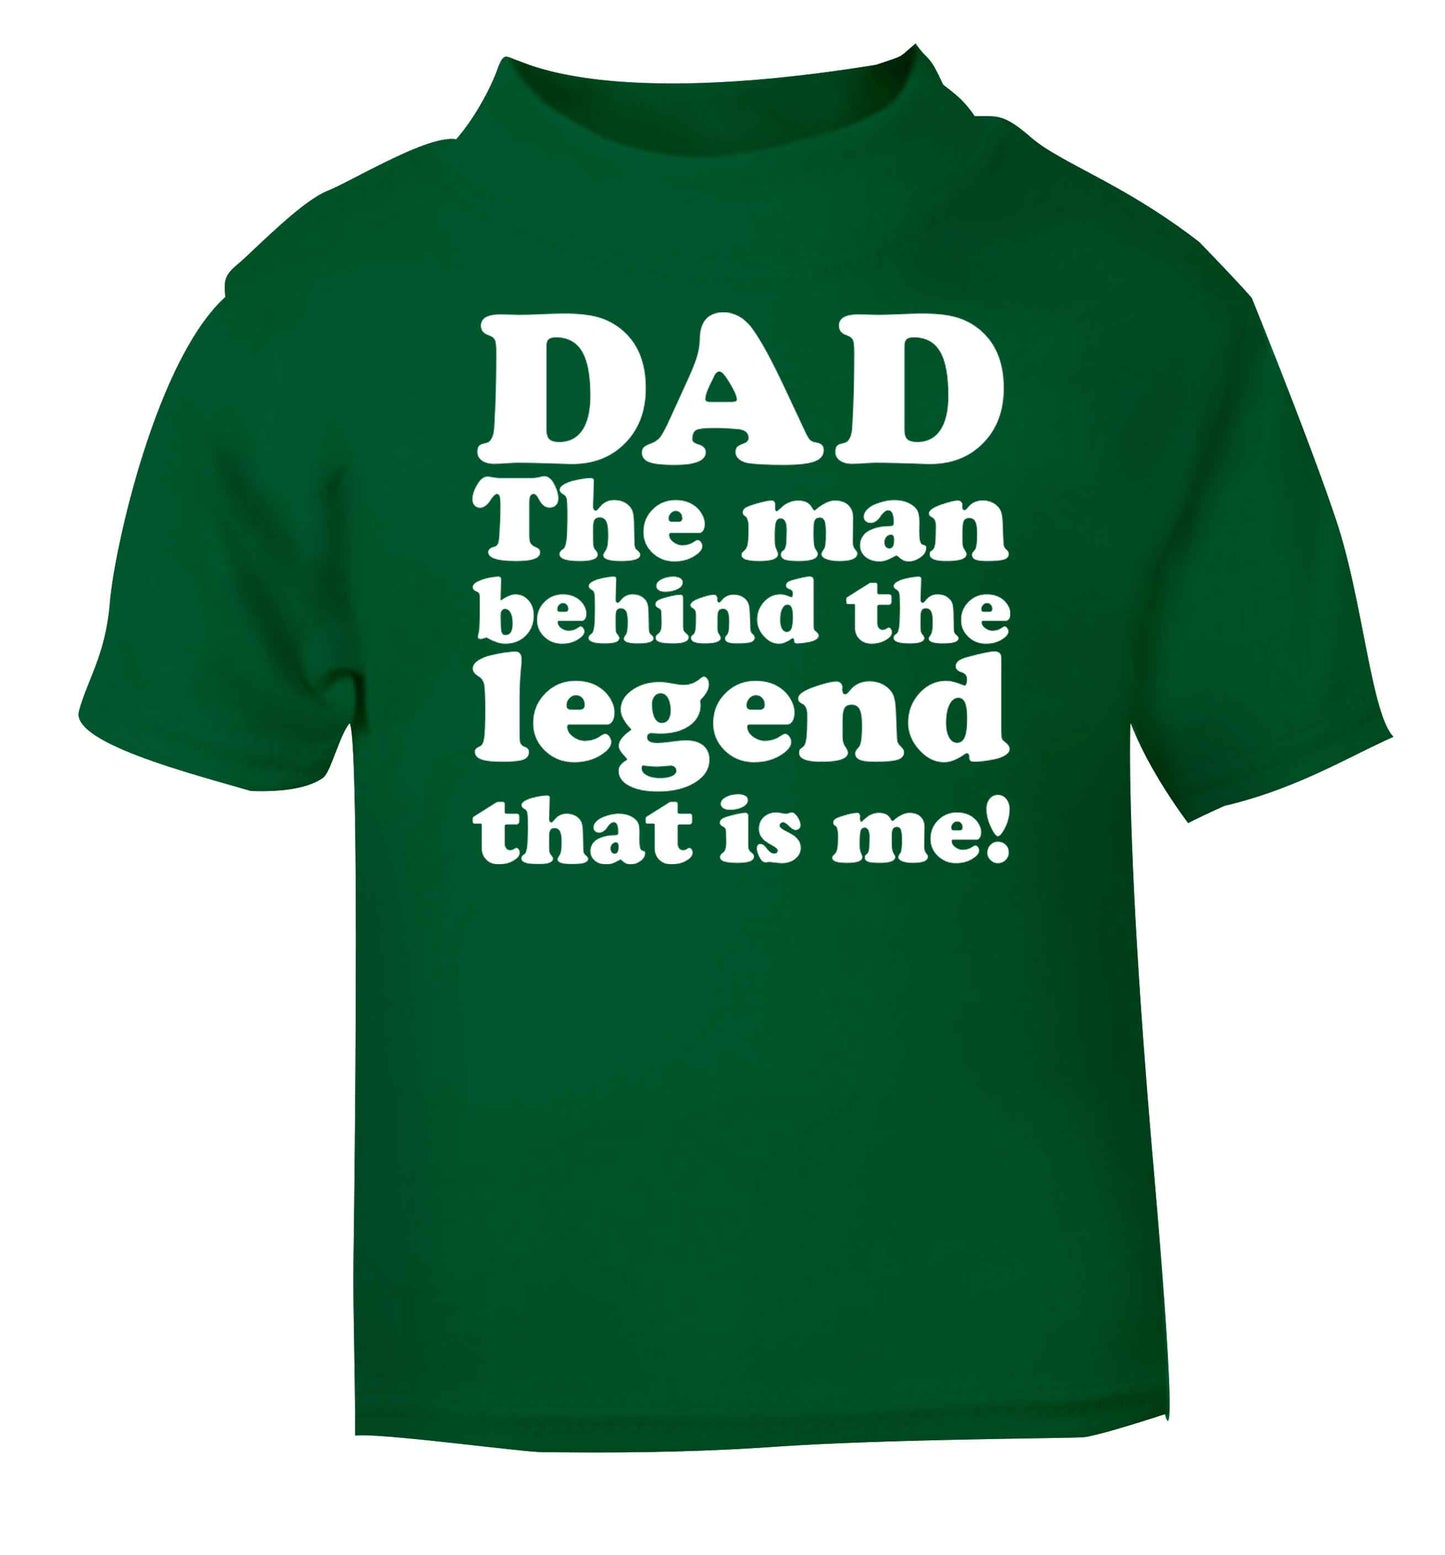 Dad the man behind the legend that is me green baby toddler Tshirt 2 Years